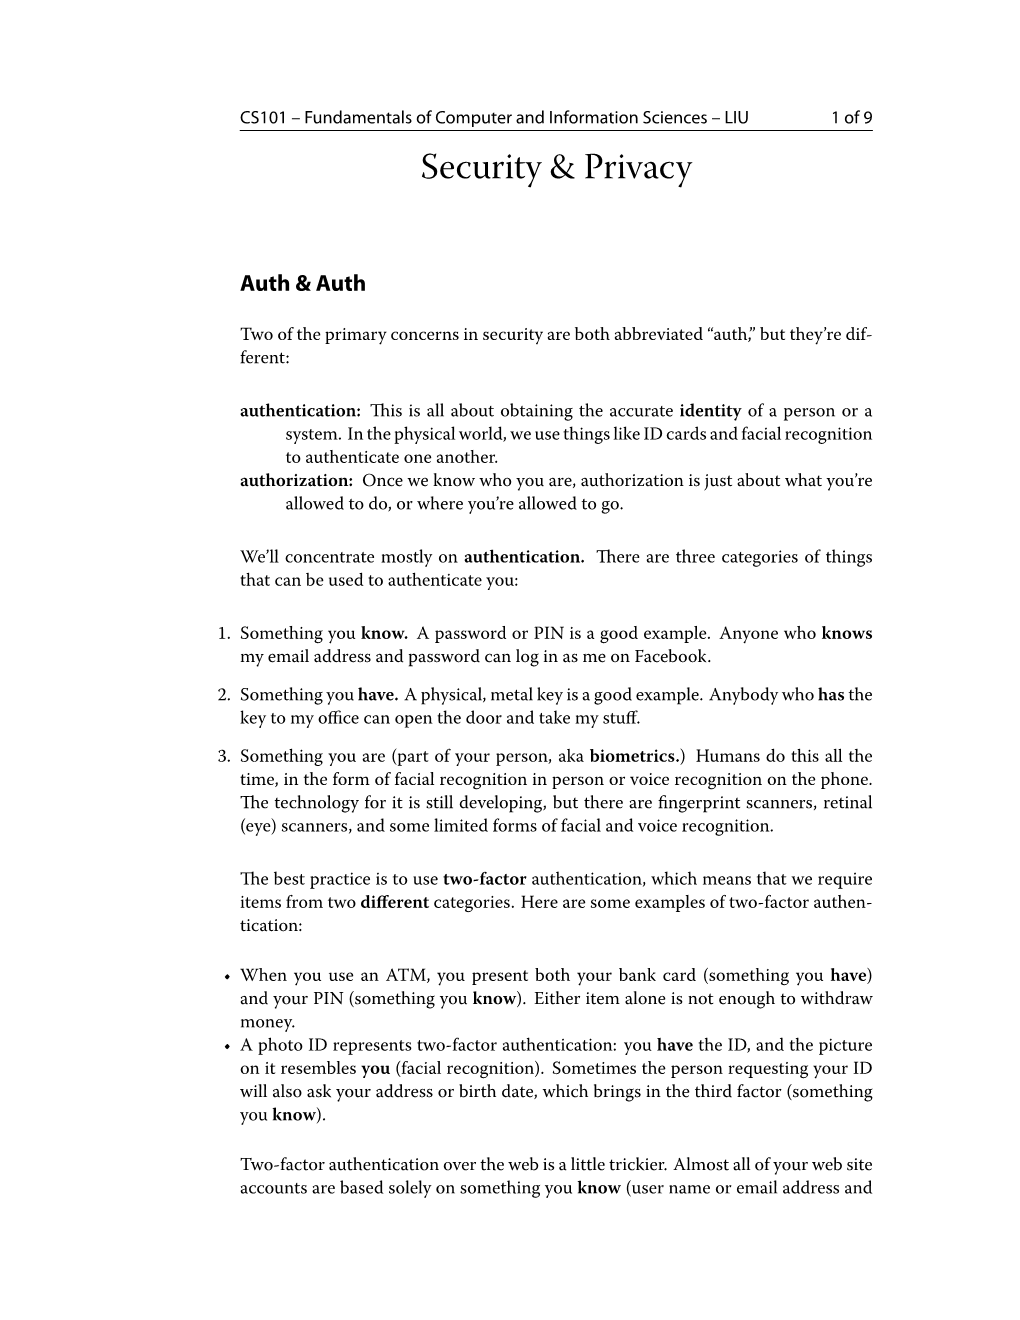 Security & Privacy